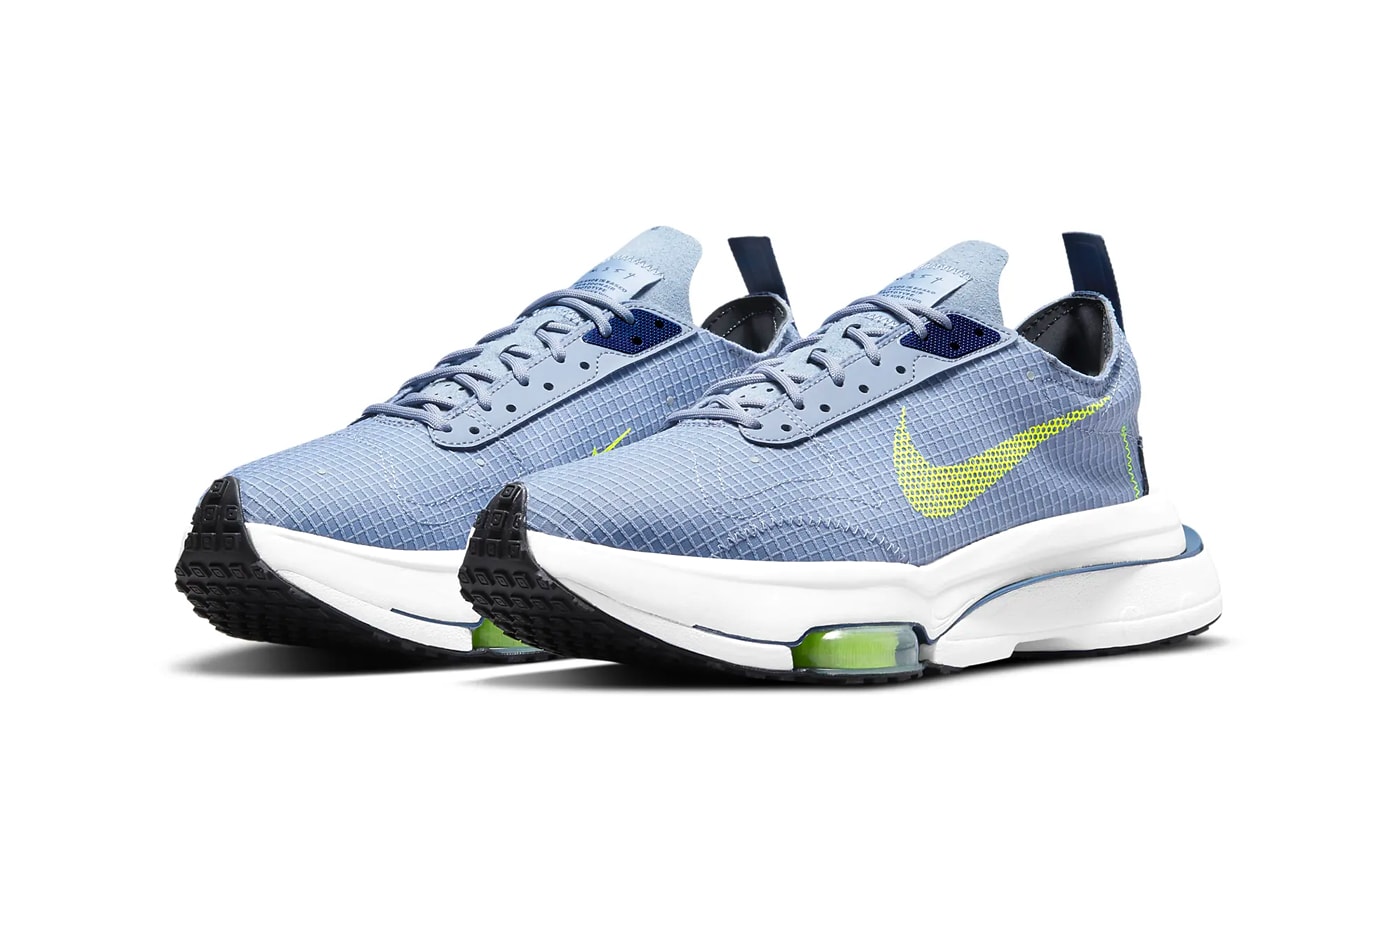 Nike Air Zoom Type Ashen Slate 2FCV2220 400 menswear streetwear kicks trainers runners sneakers spring summer 2021 ss21 collection